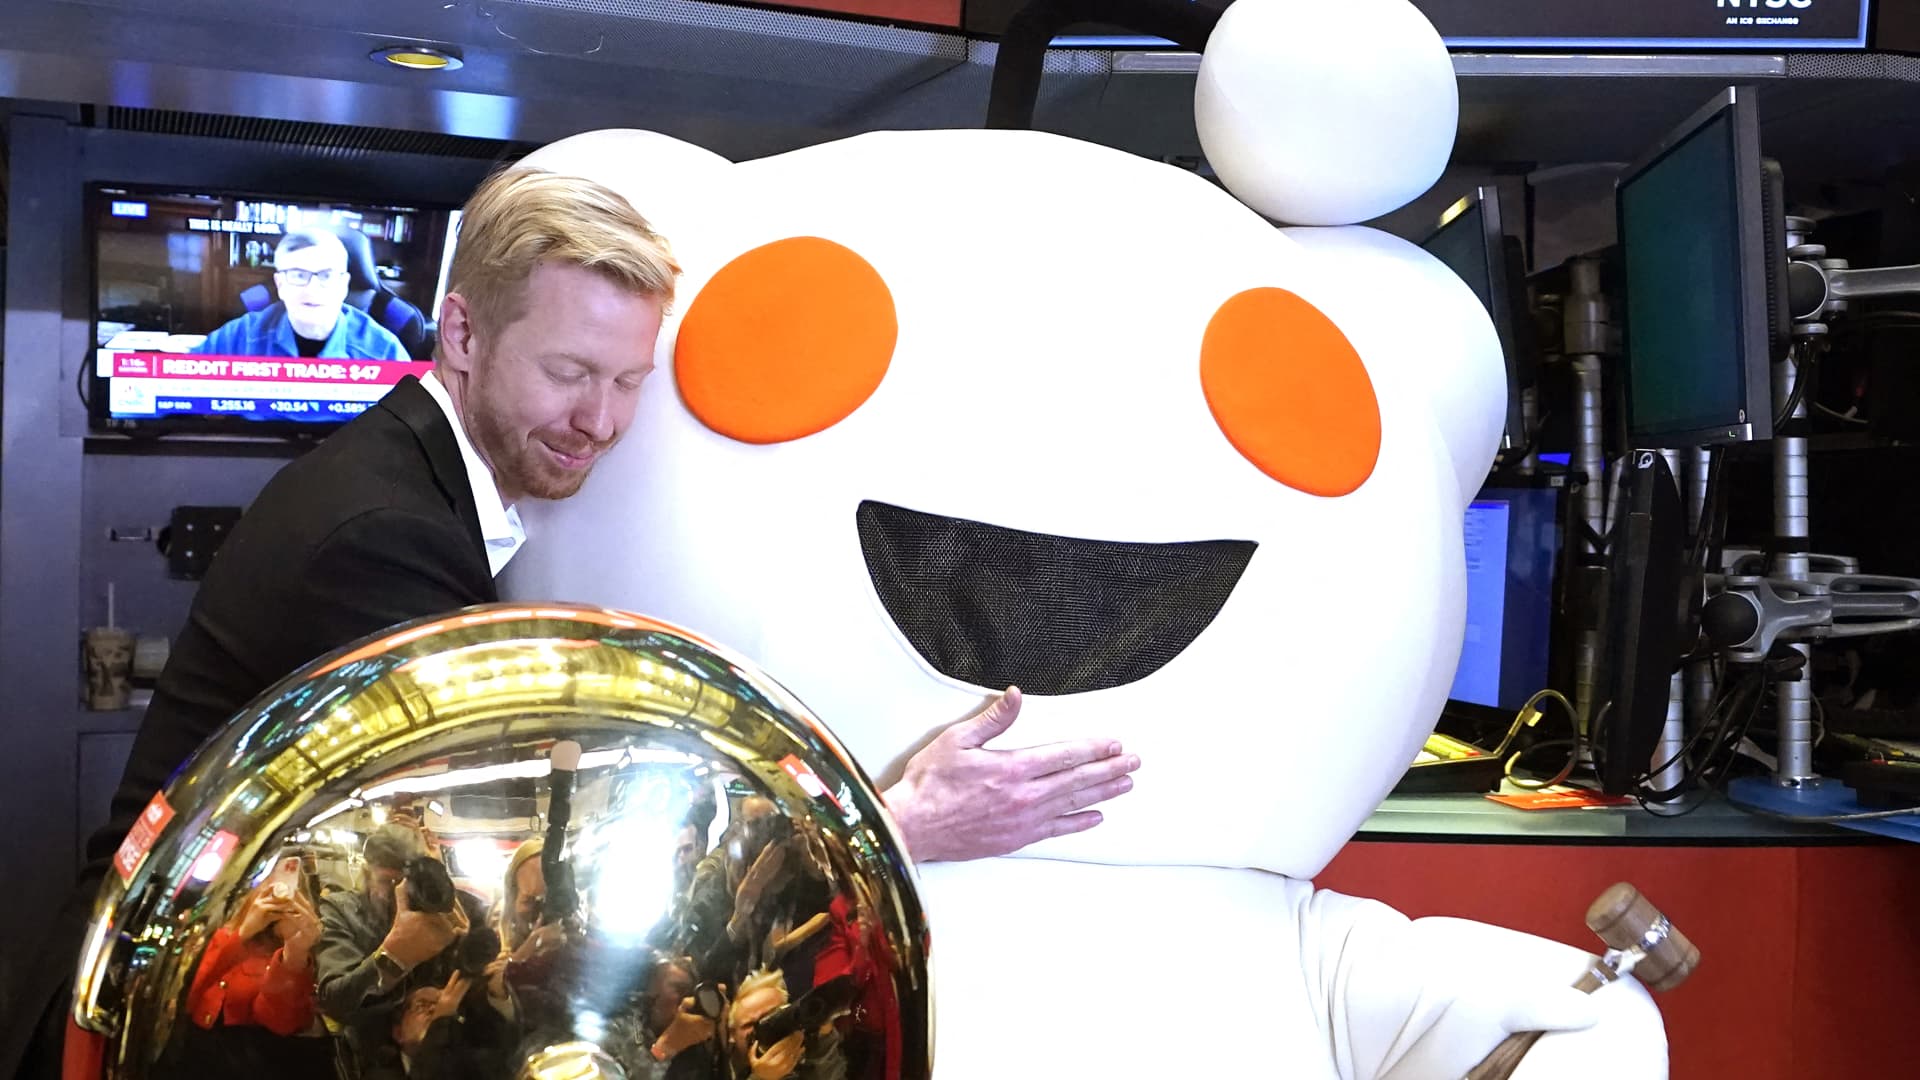 Reddit shares rise 30% to start week after social media company’s IPO